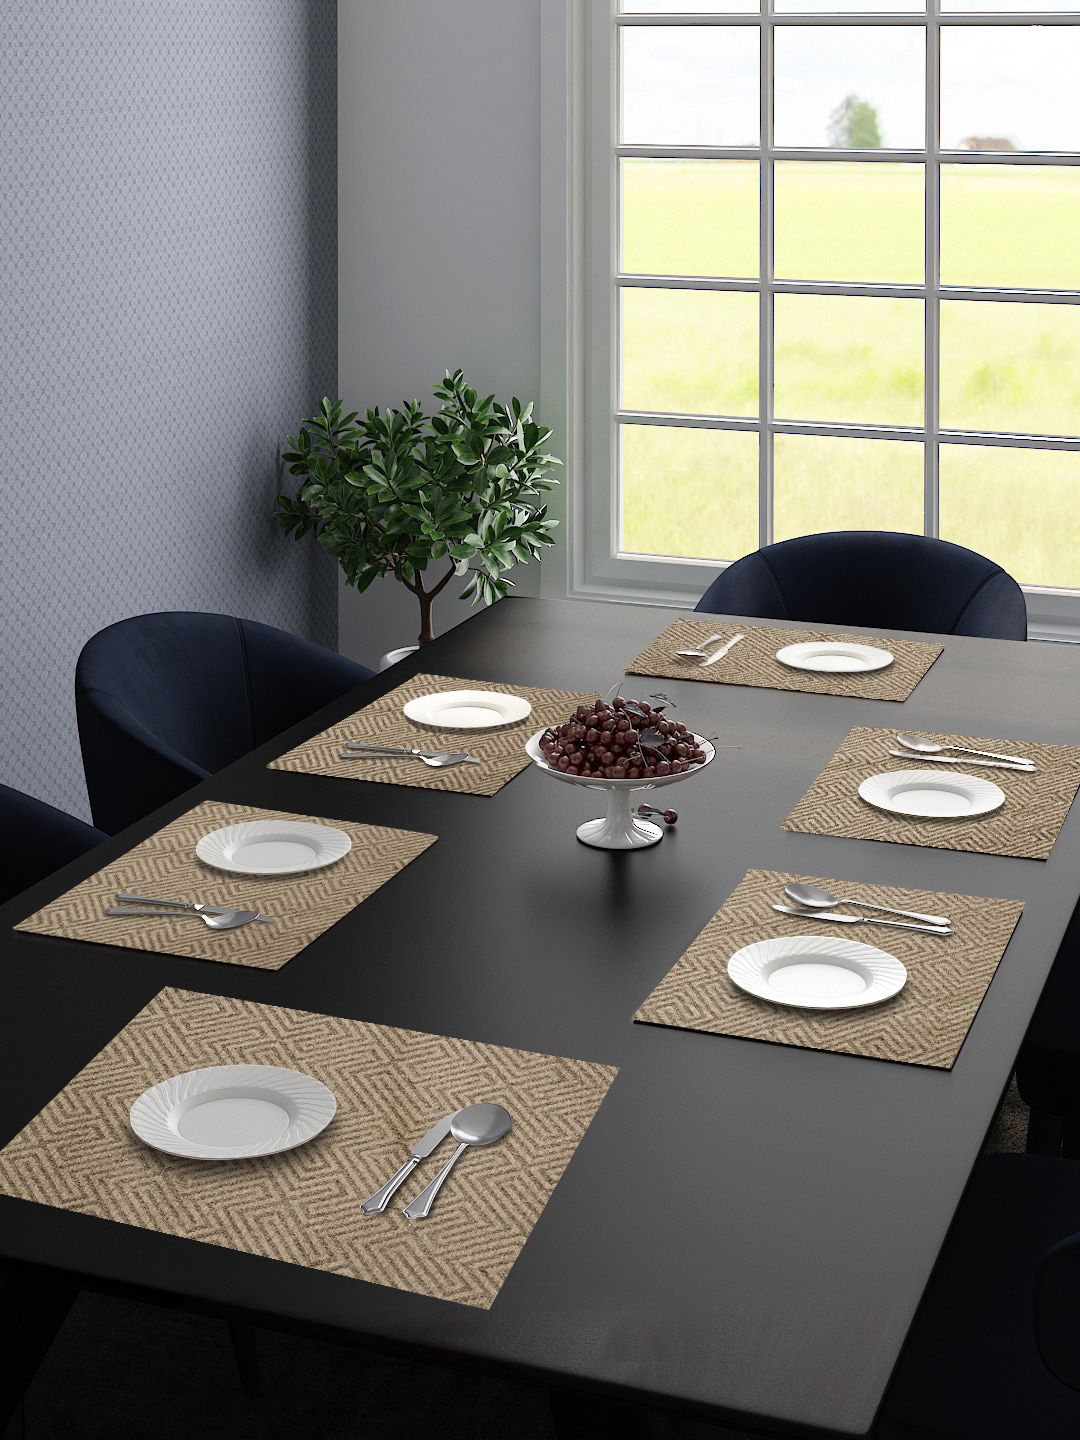 Saral Home Set Of 6 Beige & Brown Textured Rectangular Table Placemats Price in India